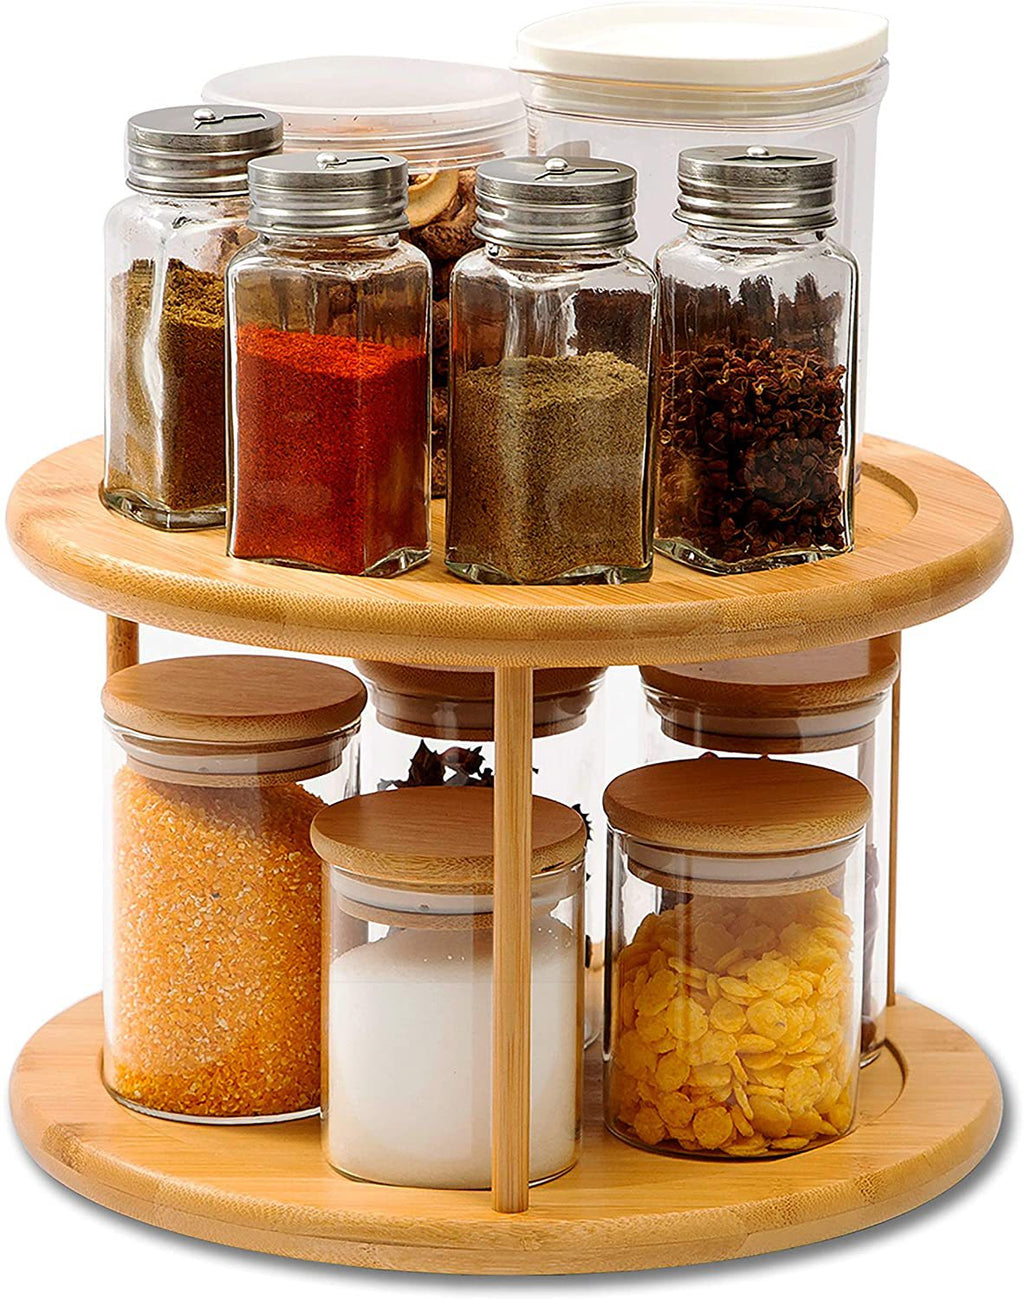 Round Bamboo Turntable Cabinet Organizer 2 Tier Spice Rack